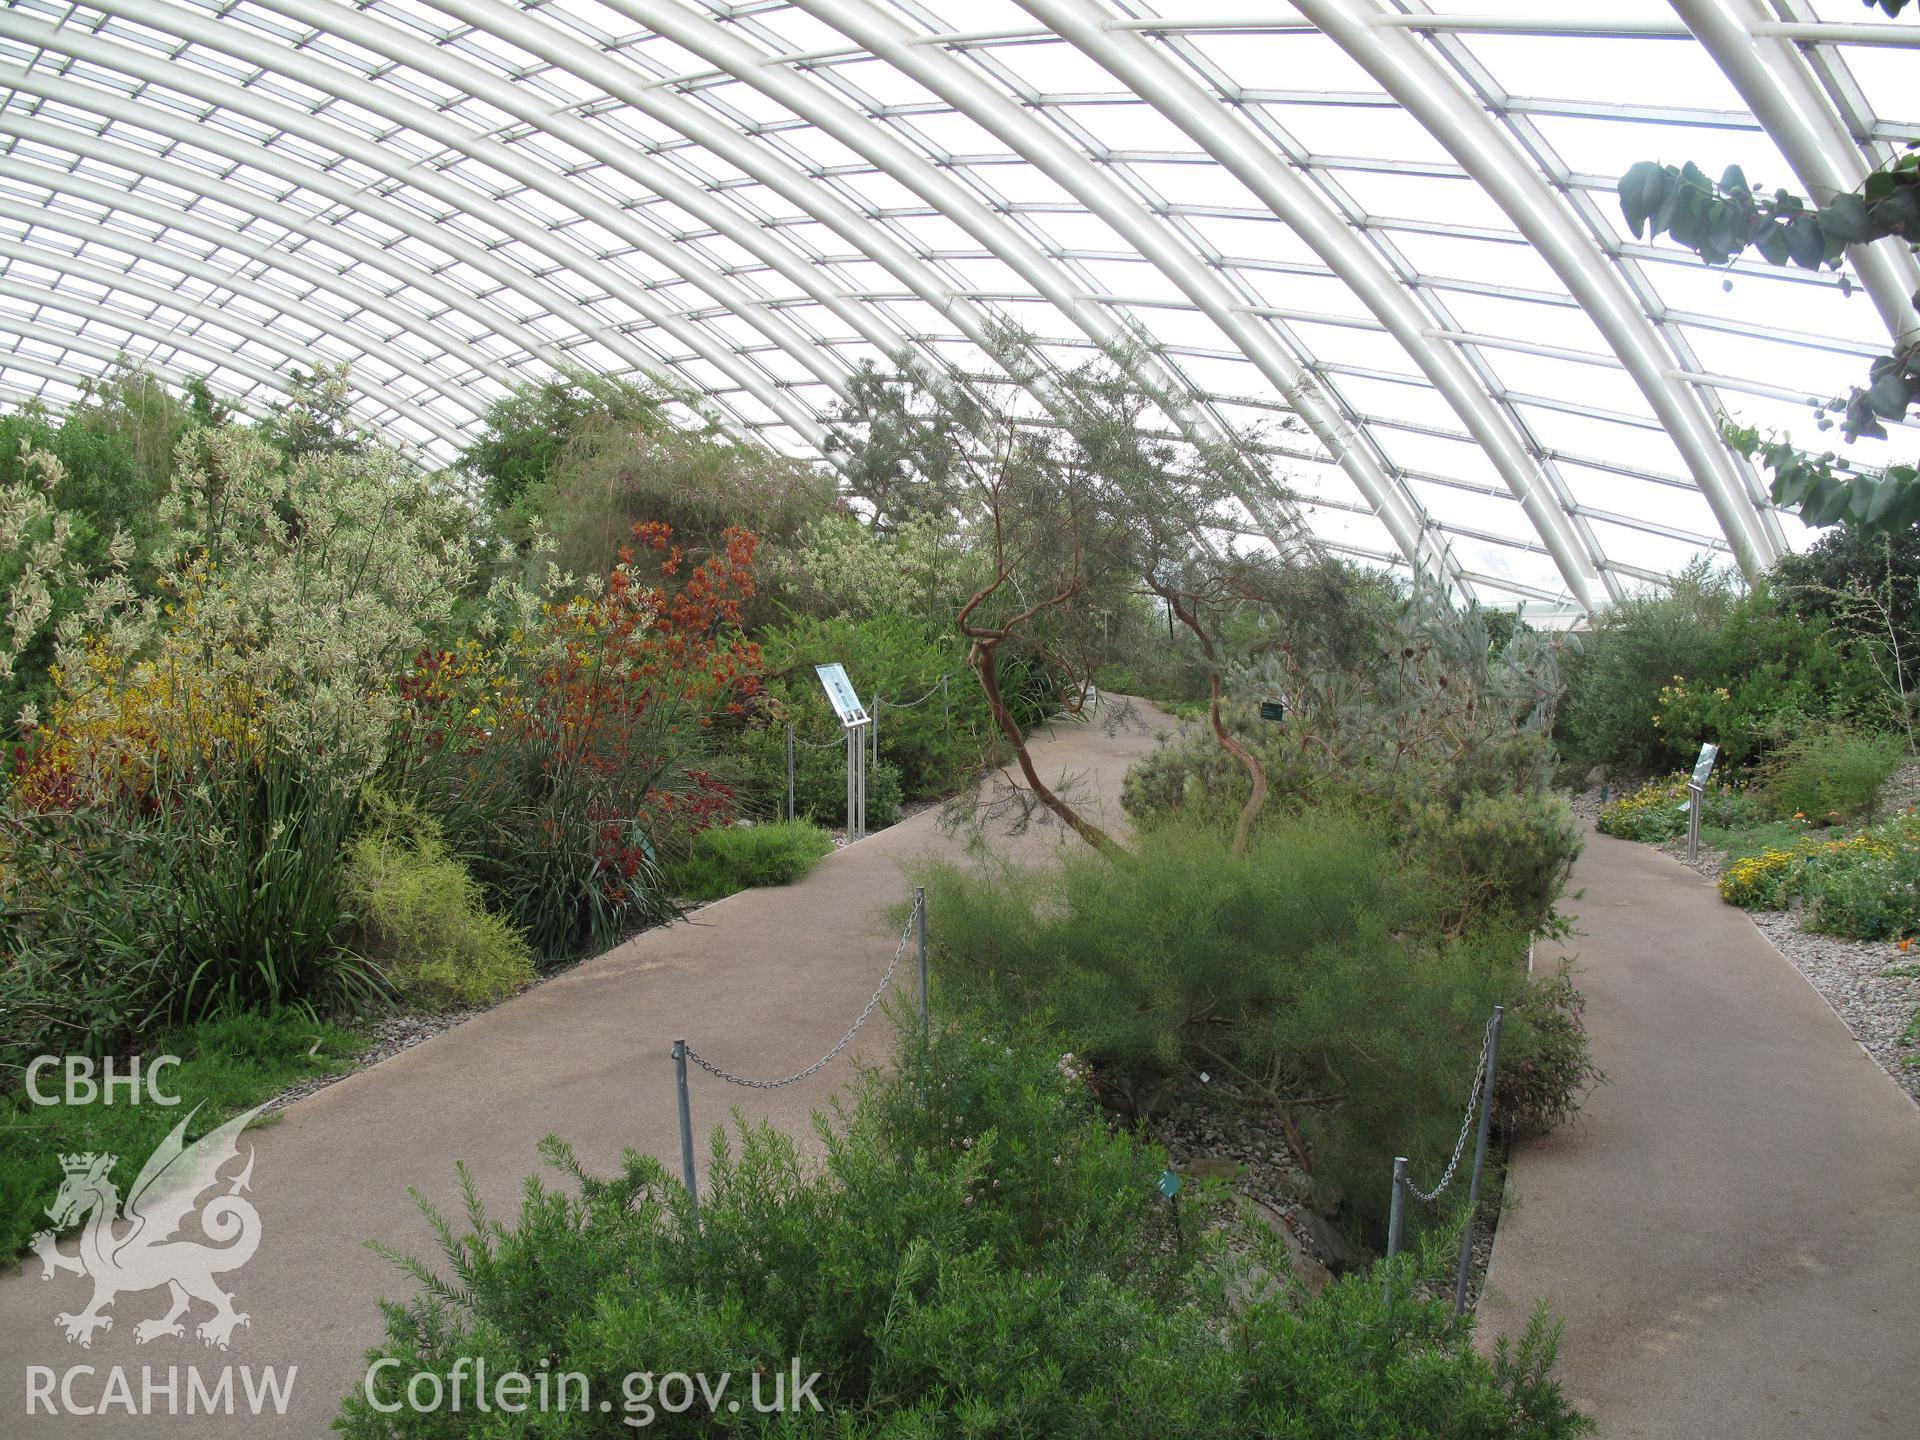 Interior view of the Great Glasshouse, National Botanic Garden of Wales.